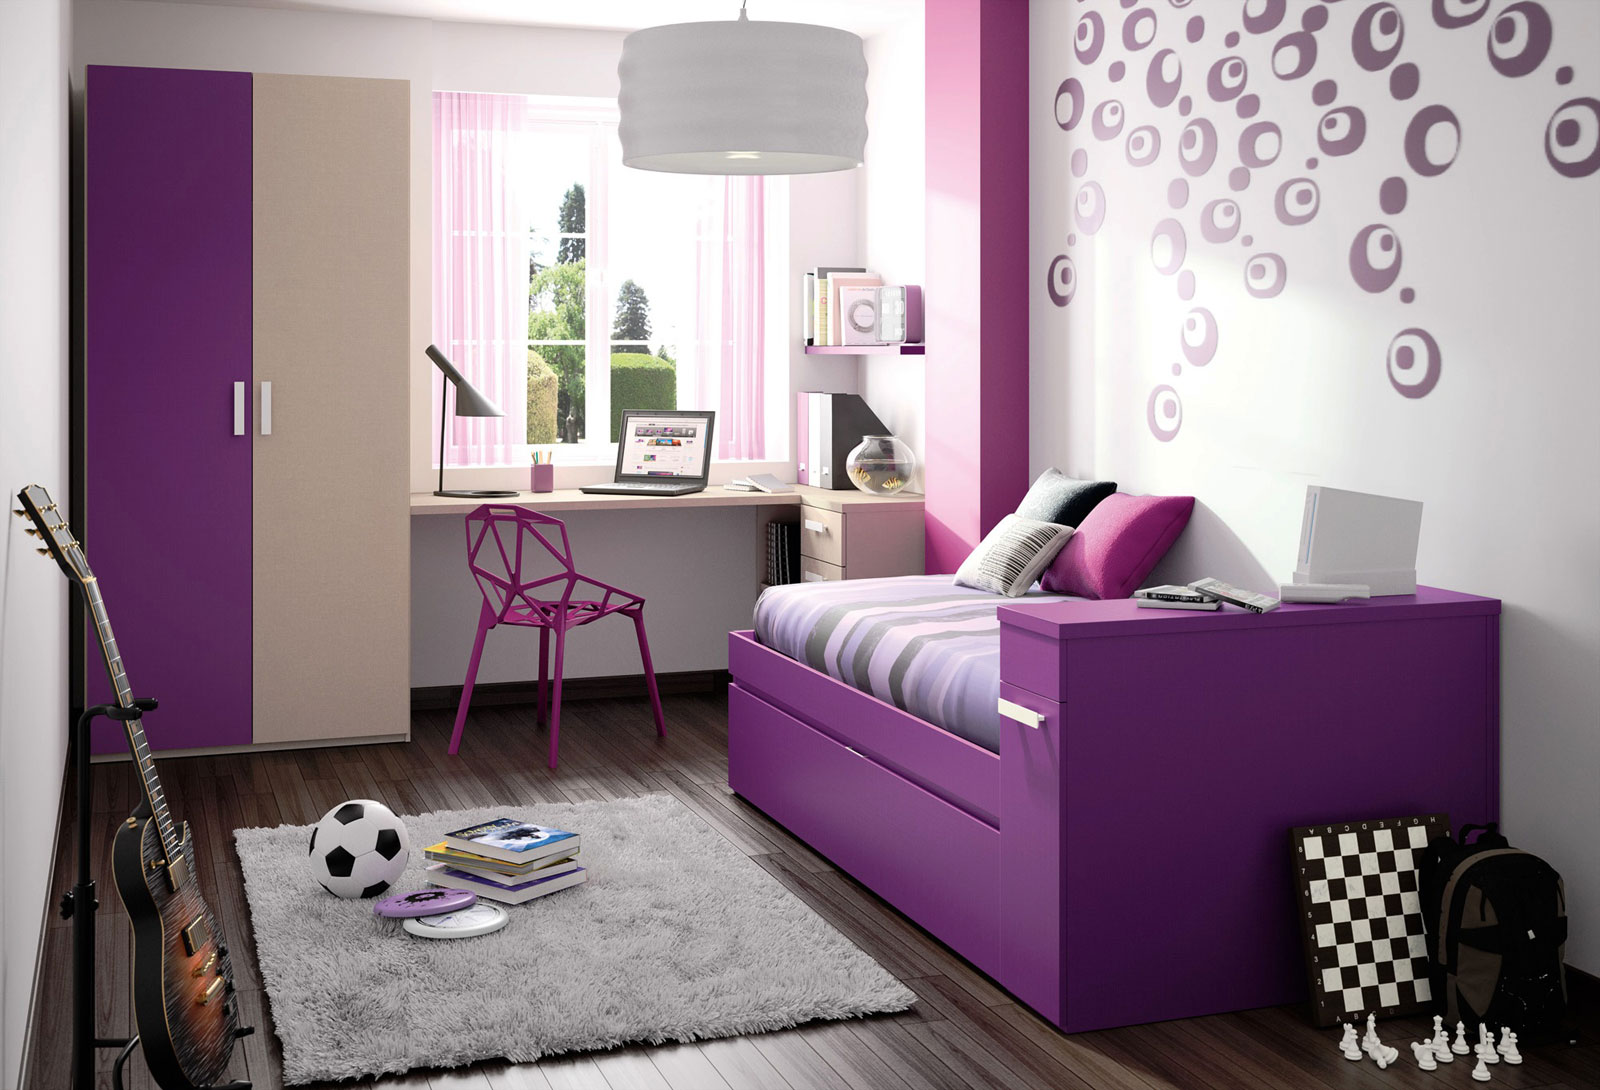 Modern Interior And Wonderful Modern Interior In White And Purple Of Cute Bedroom Ideas With Pendant Lamp Furnished With Single Bed And Soft Rug Completed With Desk And Cabinet Bedroom Cute Bedroom Ideas For Enhancing House Interior